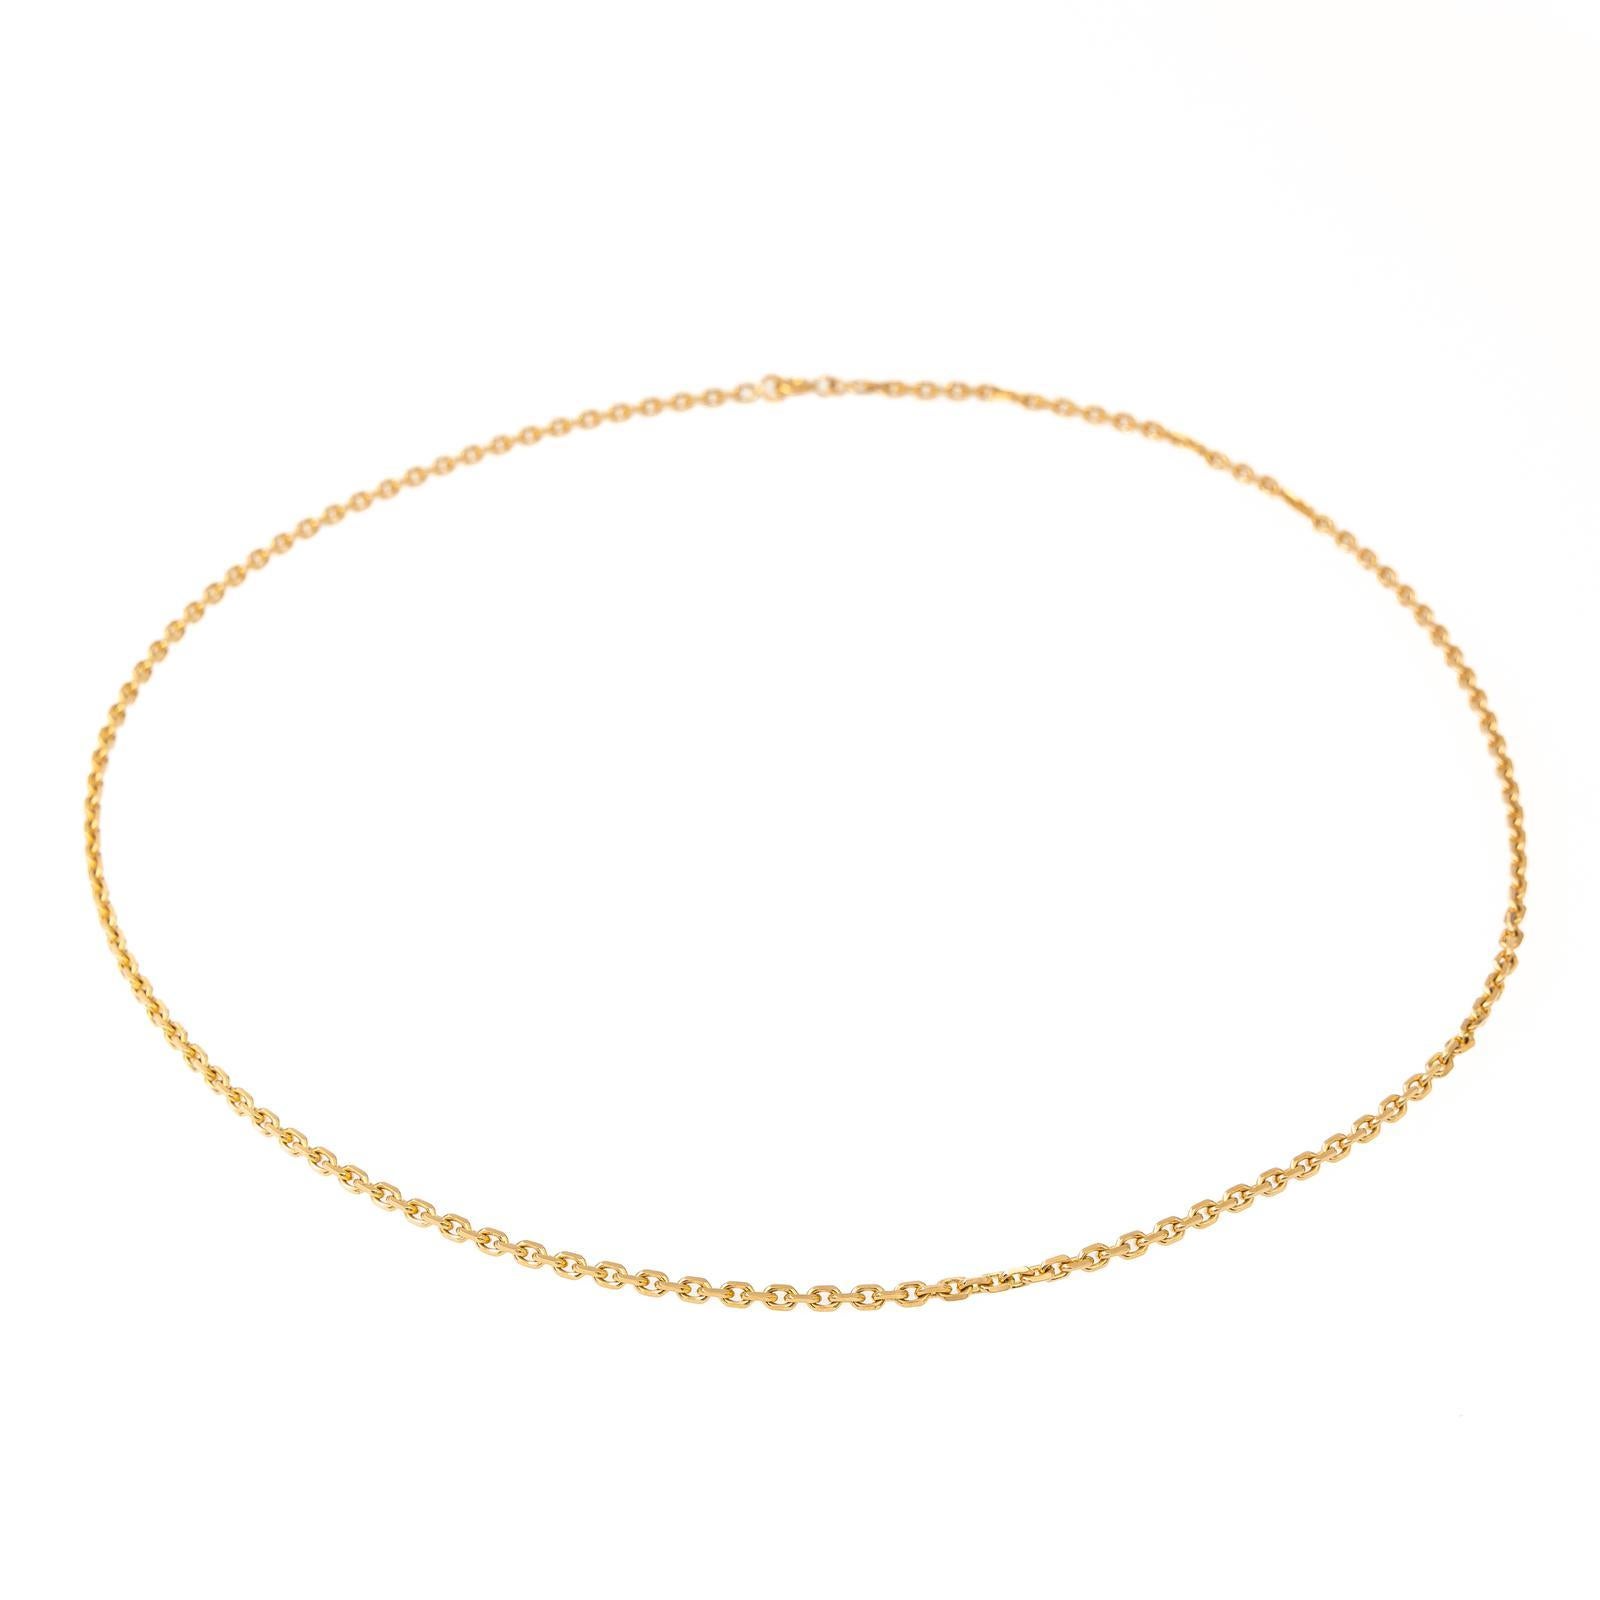 Forced mesh necklace. in yellow gold 750 thousandths (18 carats). length: 51.0 cm. width: 0.25 cm. total weight: 13.86 g. eagle head hallmark. excellent condition
